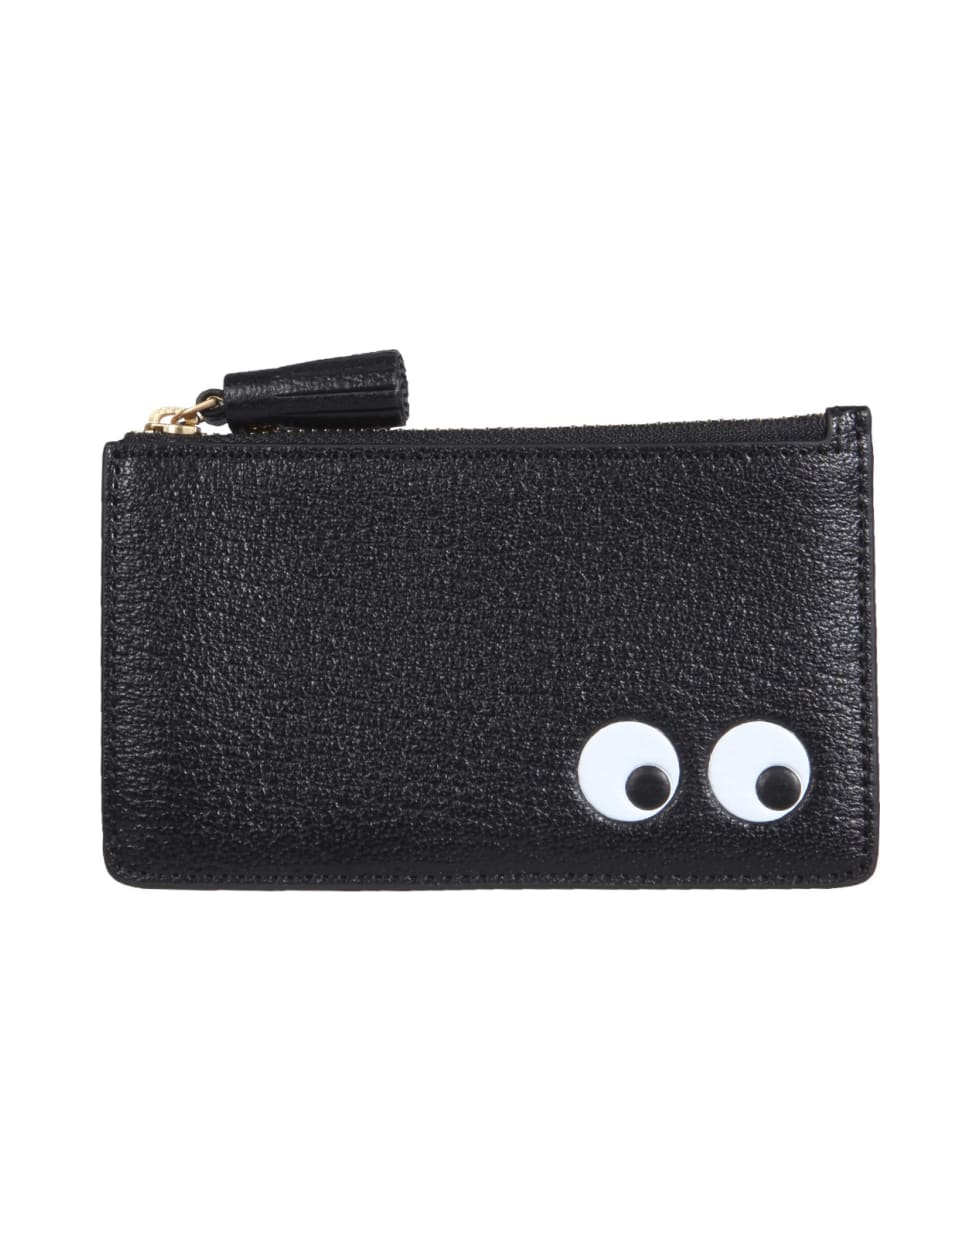 Anya Hindmarch Eyes Card Holder With Zip | italist, ALWAYS LIKE A SALE